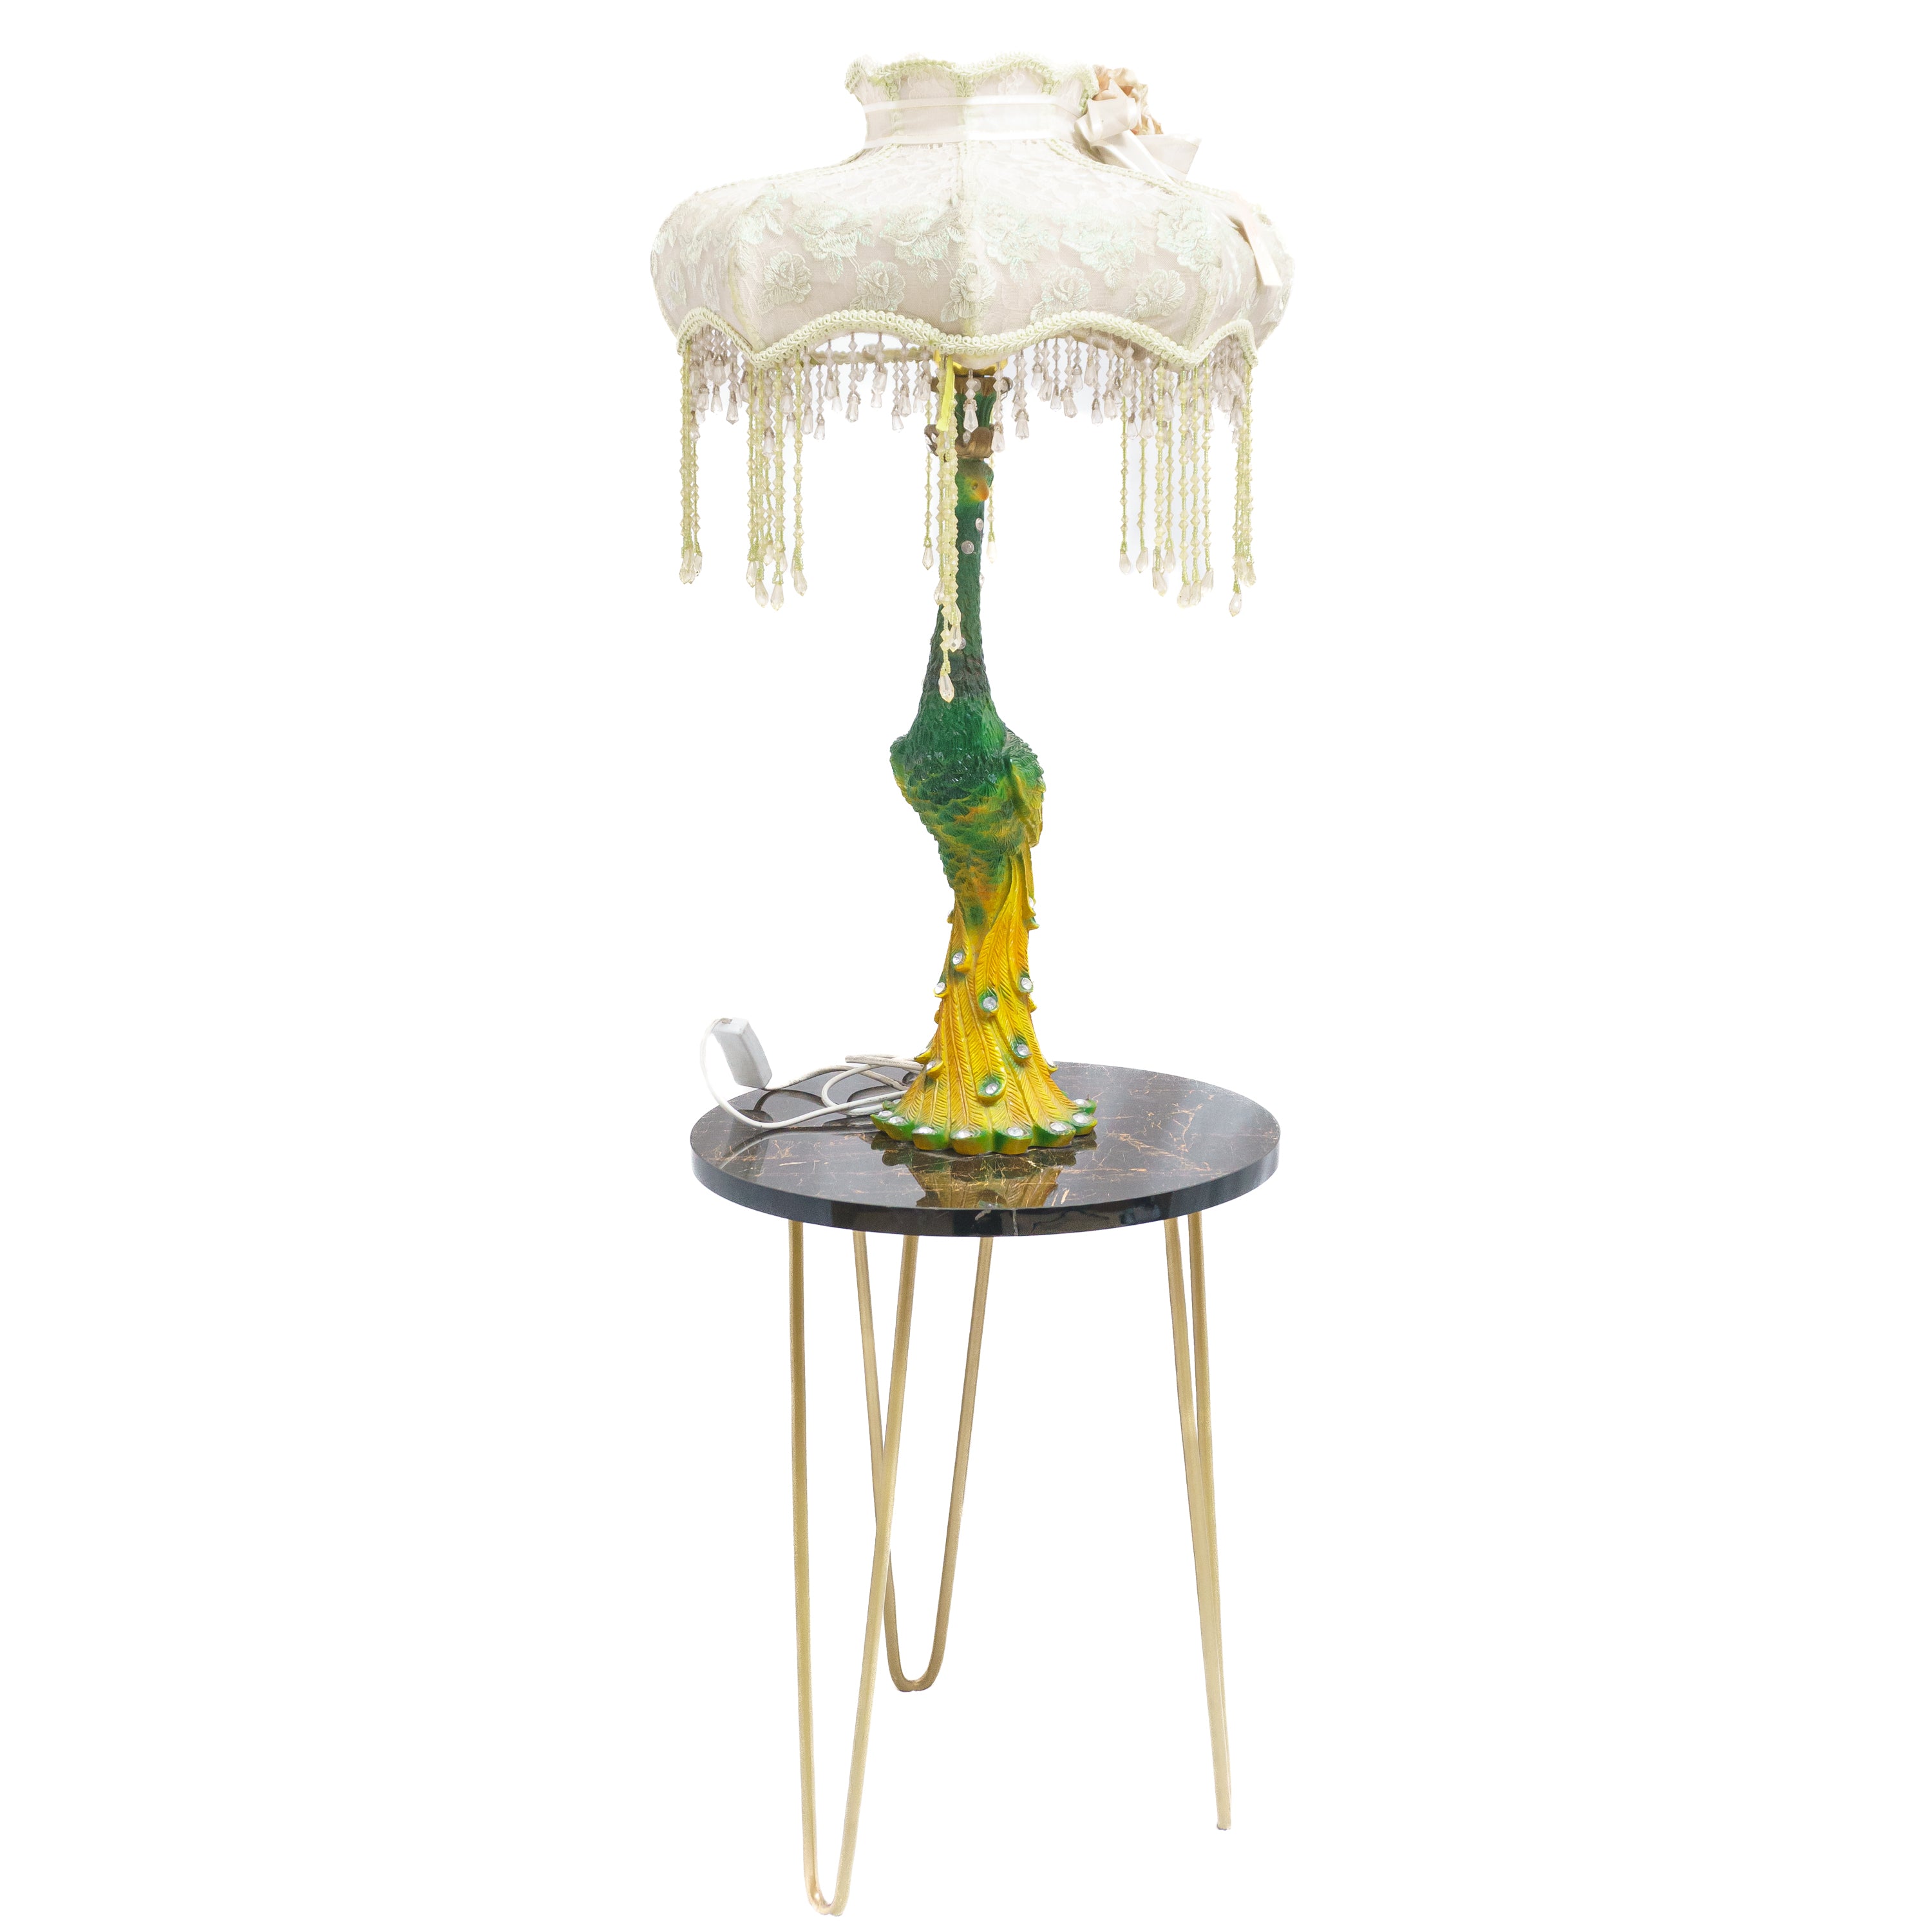 White Crown Theme Lamp Shade with Attractive Yellow Green Peacock Lamp Stand